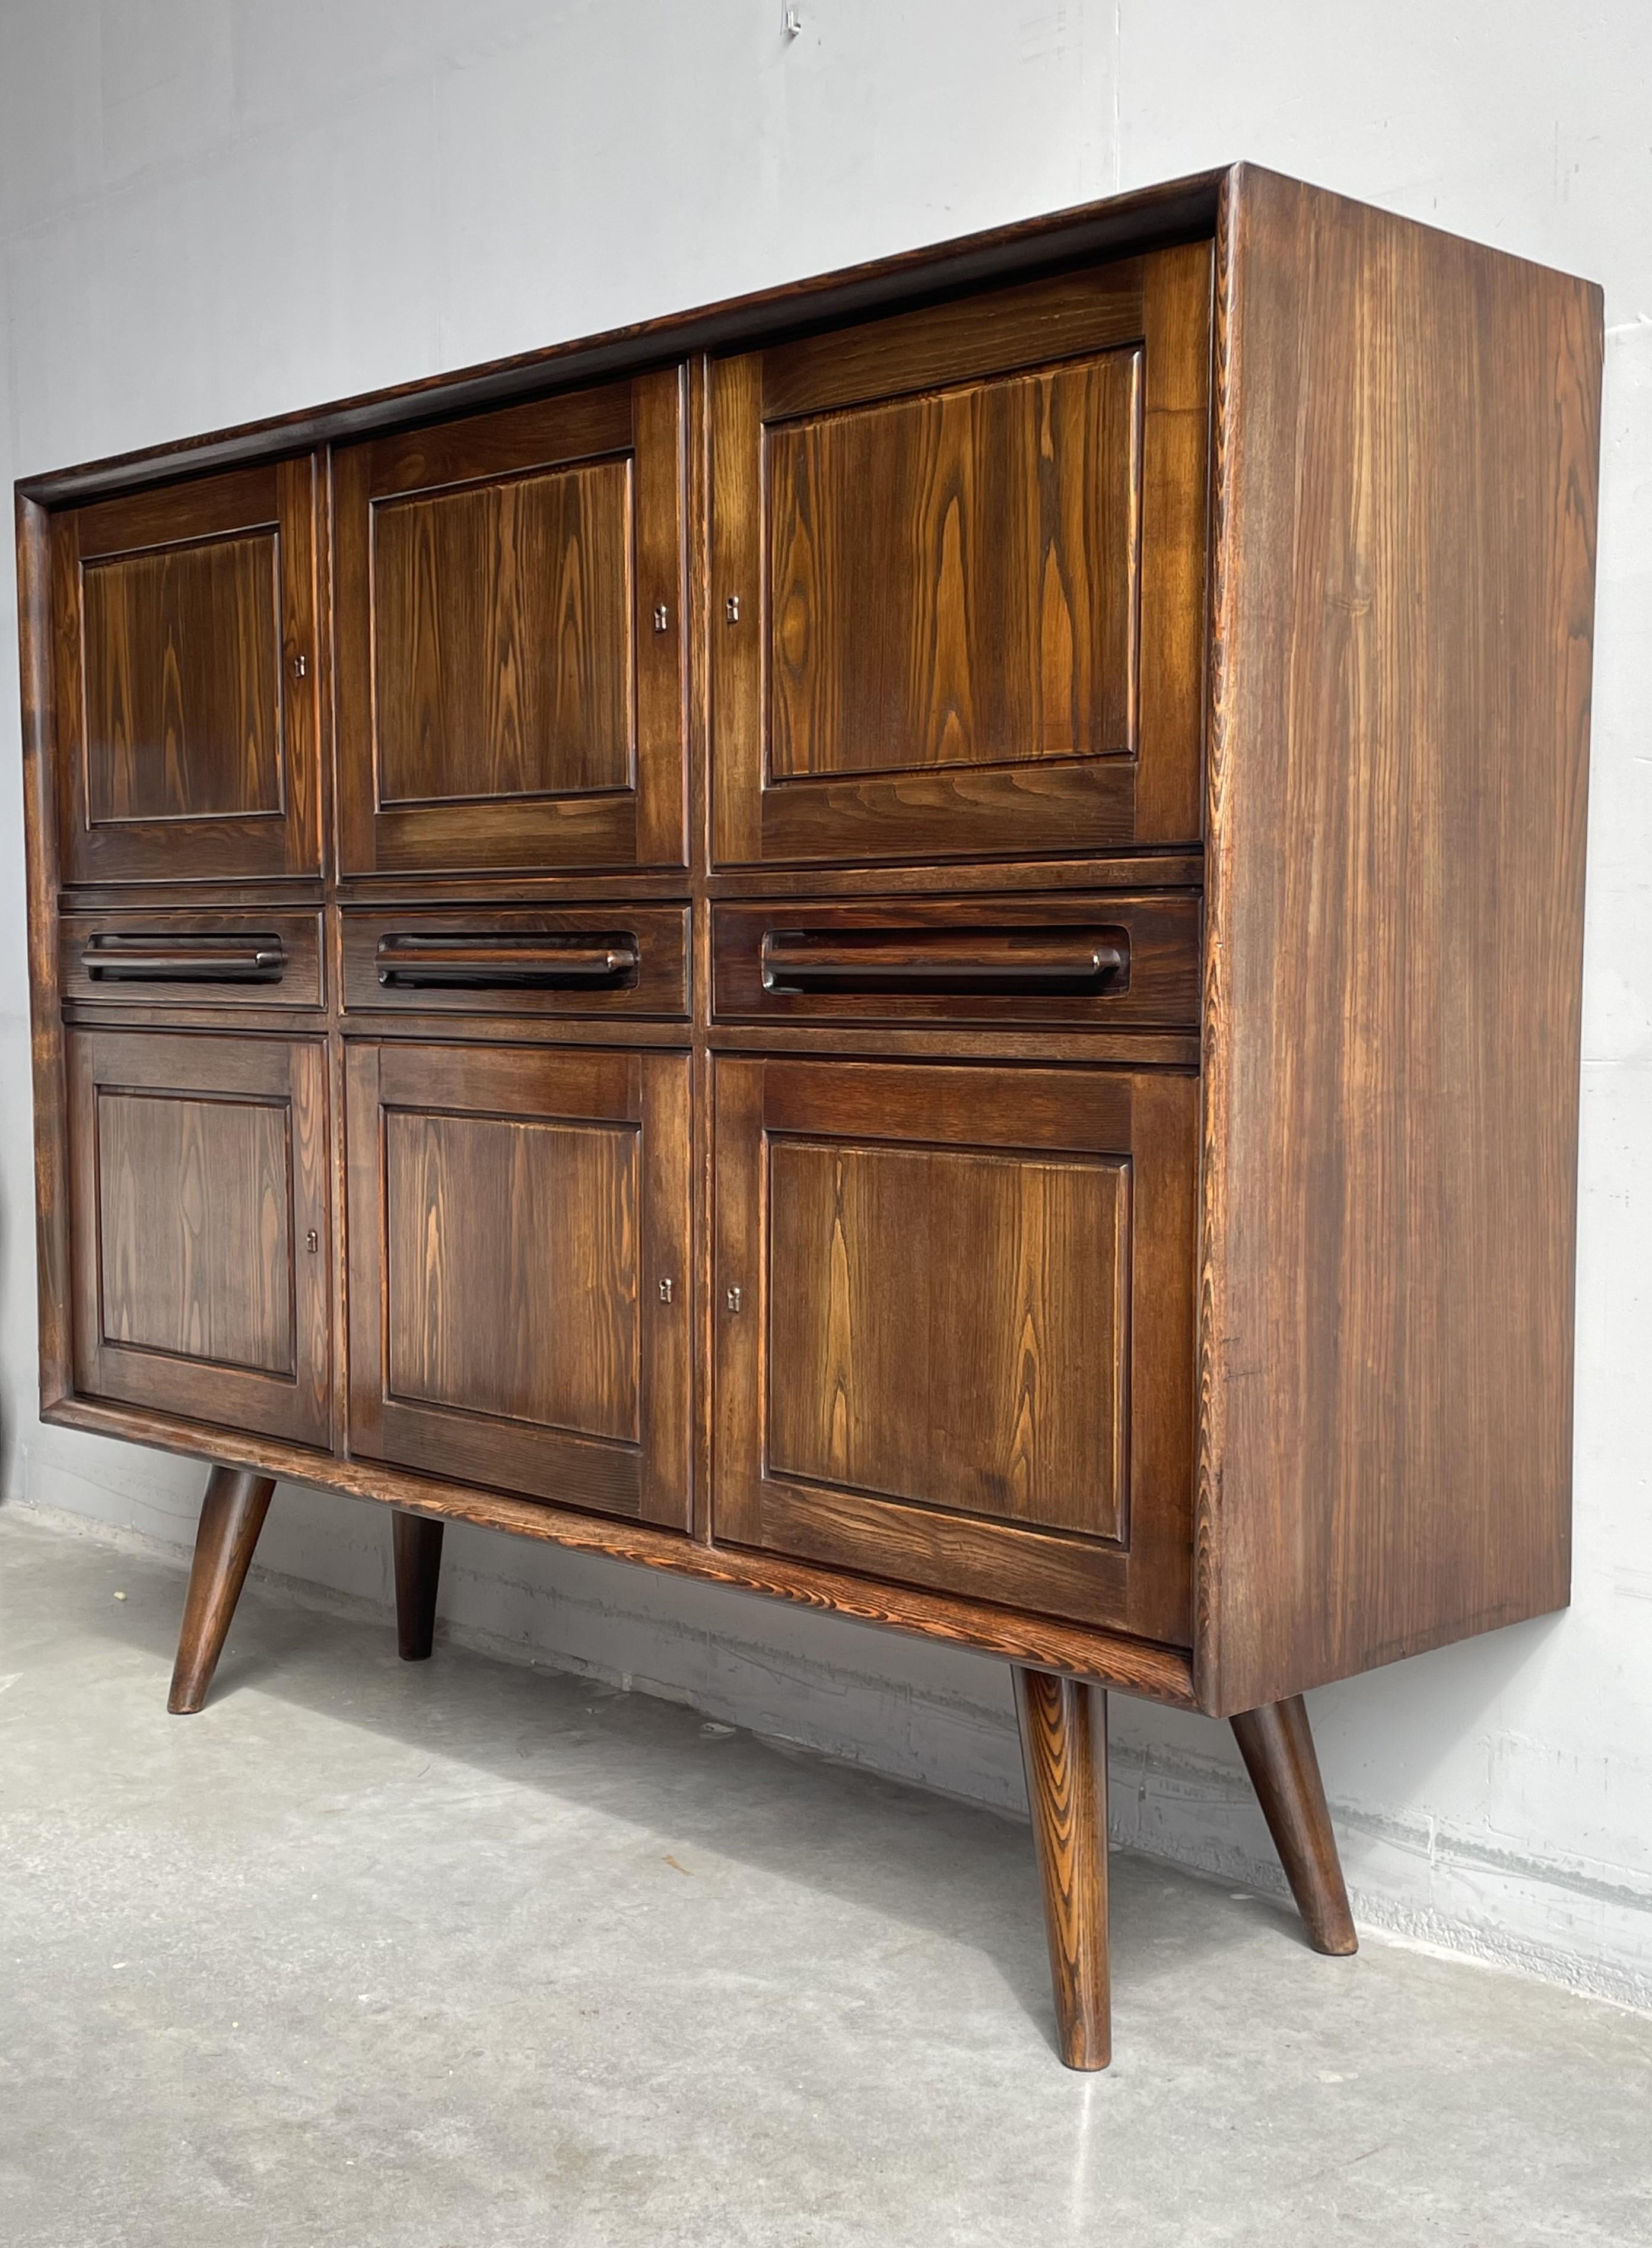 Dutch Very Rare Mid-Century Modern Sideboard / Credenza by 't Woonhuys of Amsterdam For Sale